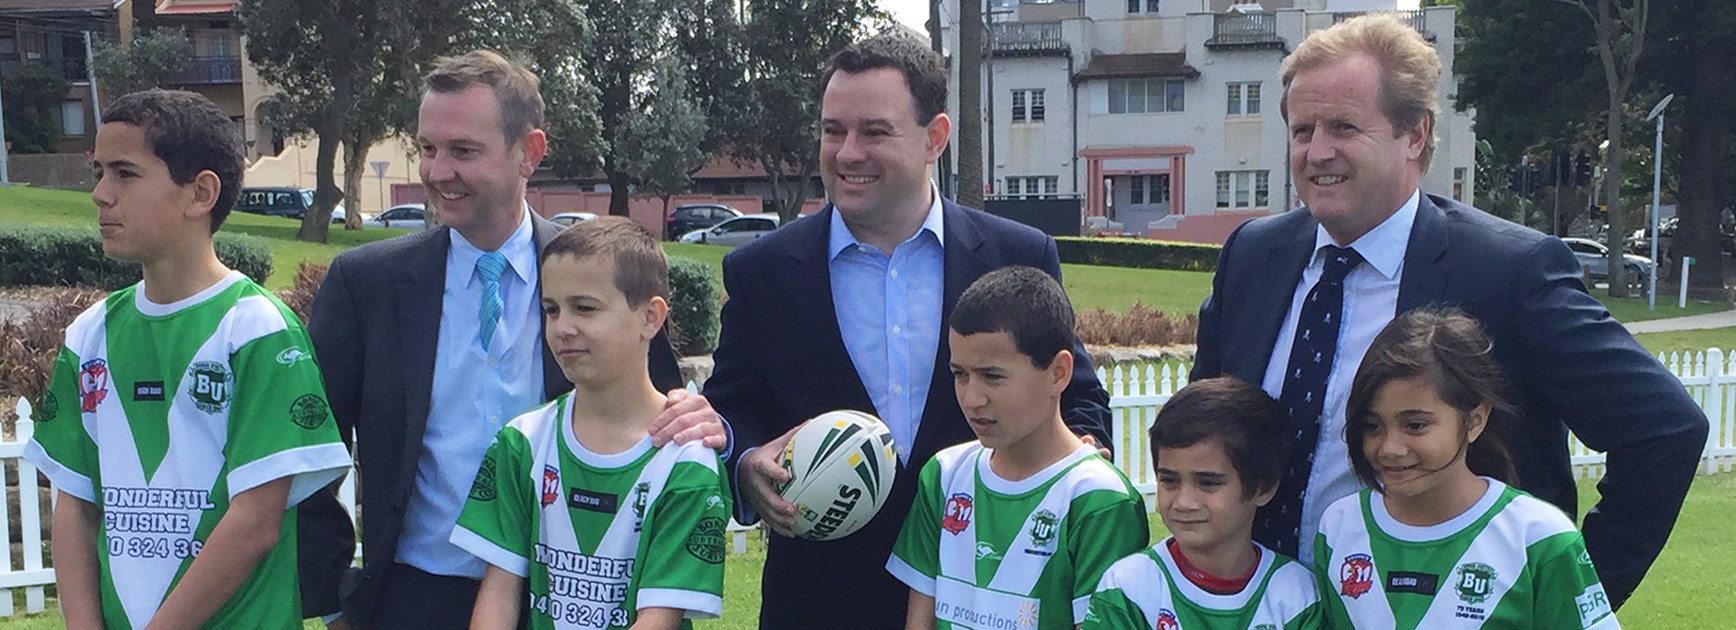 NRL CEO Dave Smith and Minister for Sport Stuart Ayres were joined by junior players from Bondi United Rugby League Club.